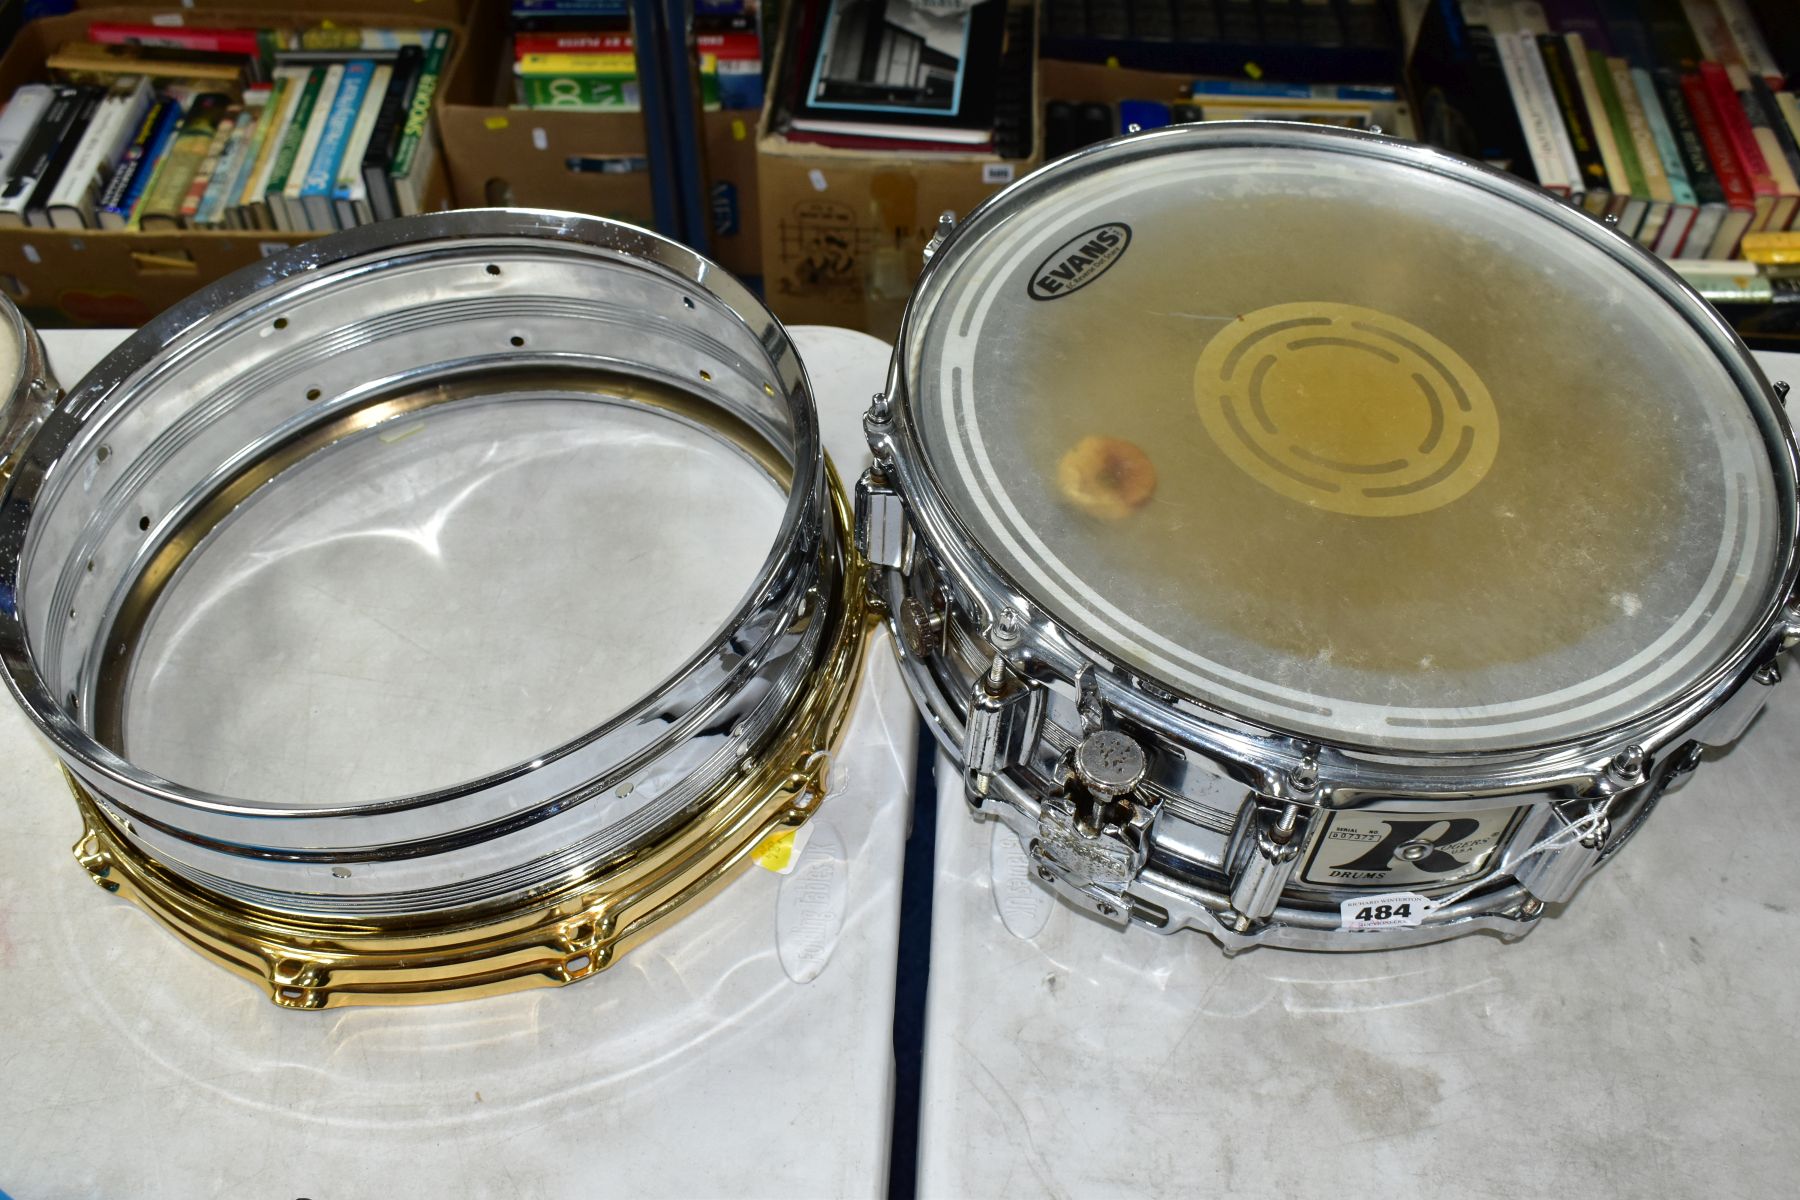 A VINTAGE ROGERS DYNASONIC 14 INCH X 5 INCH CHROMED SNARE DRUM, serial No. D07372 and a Rogers